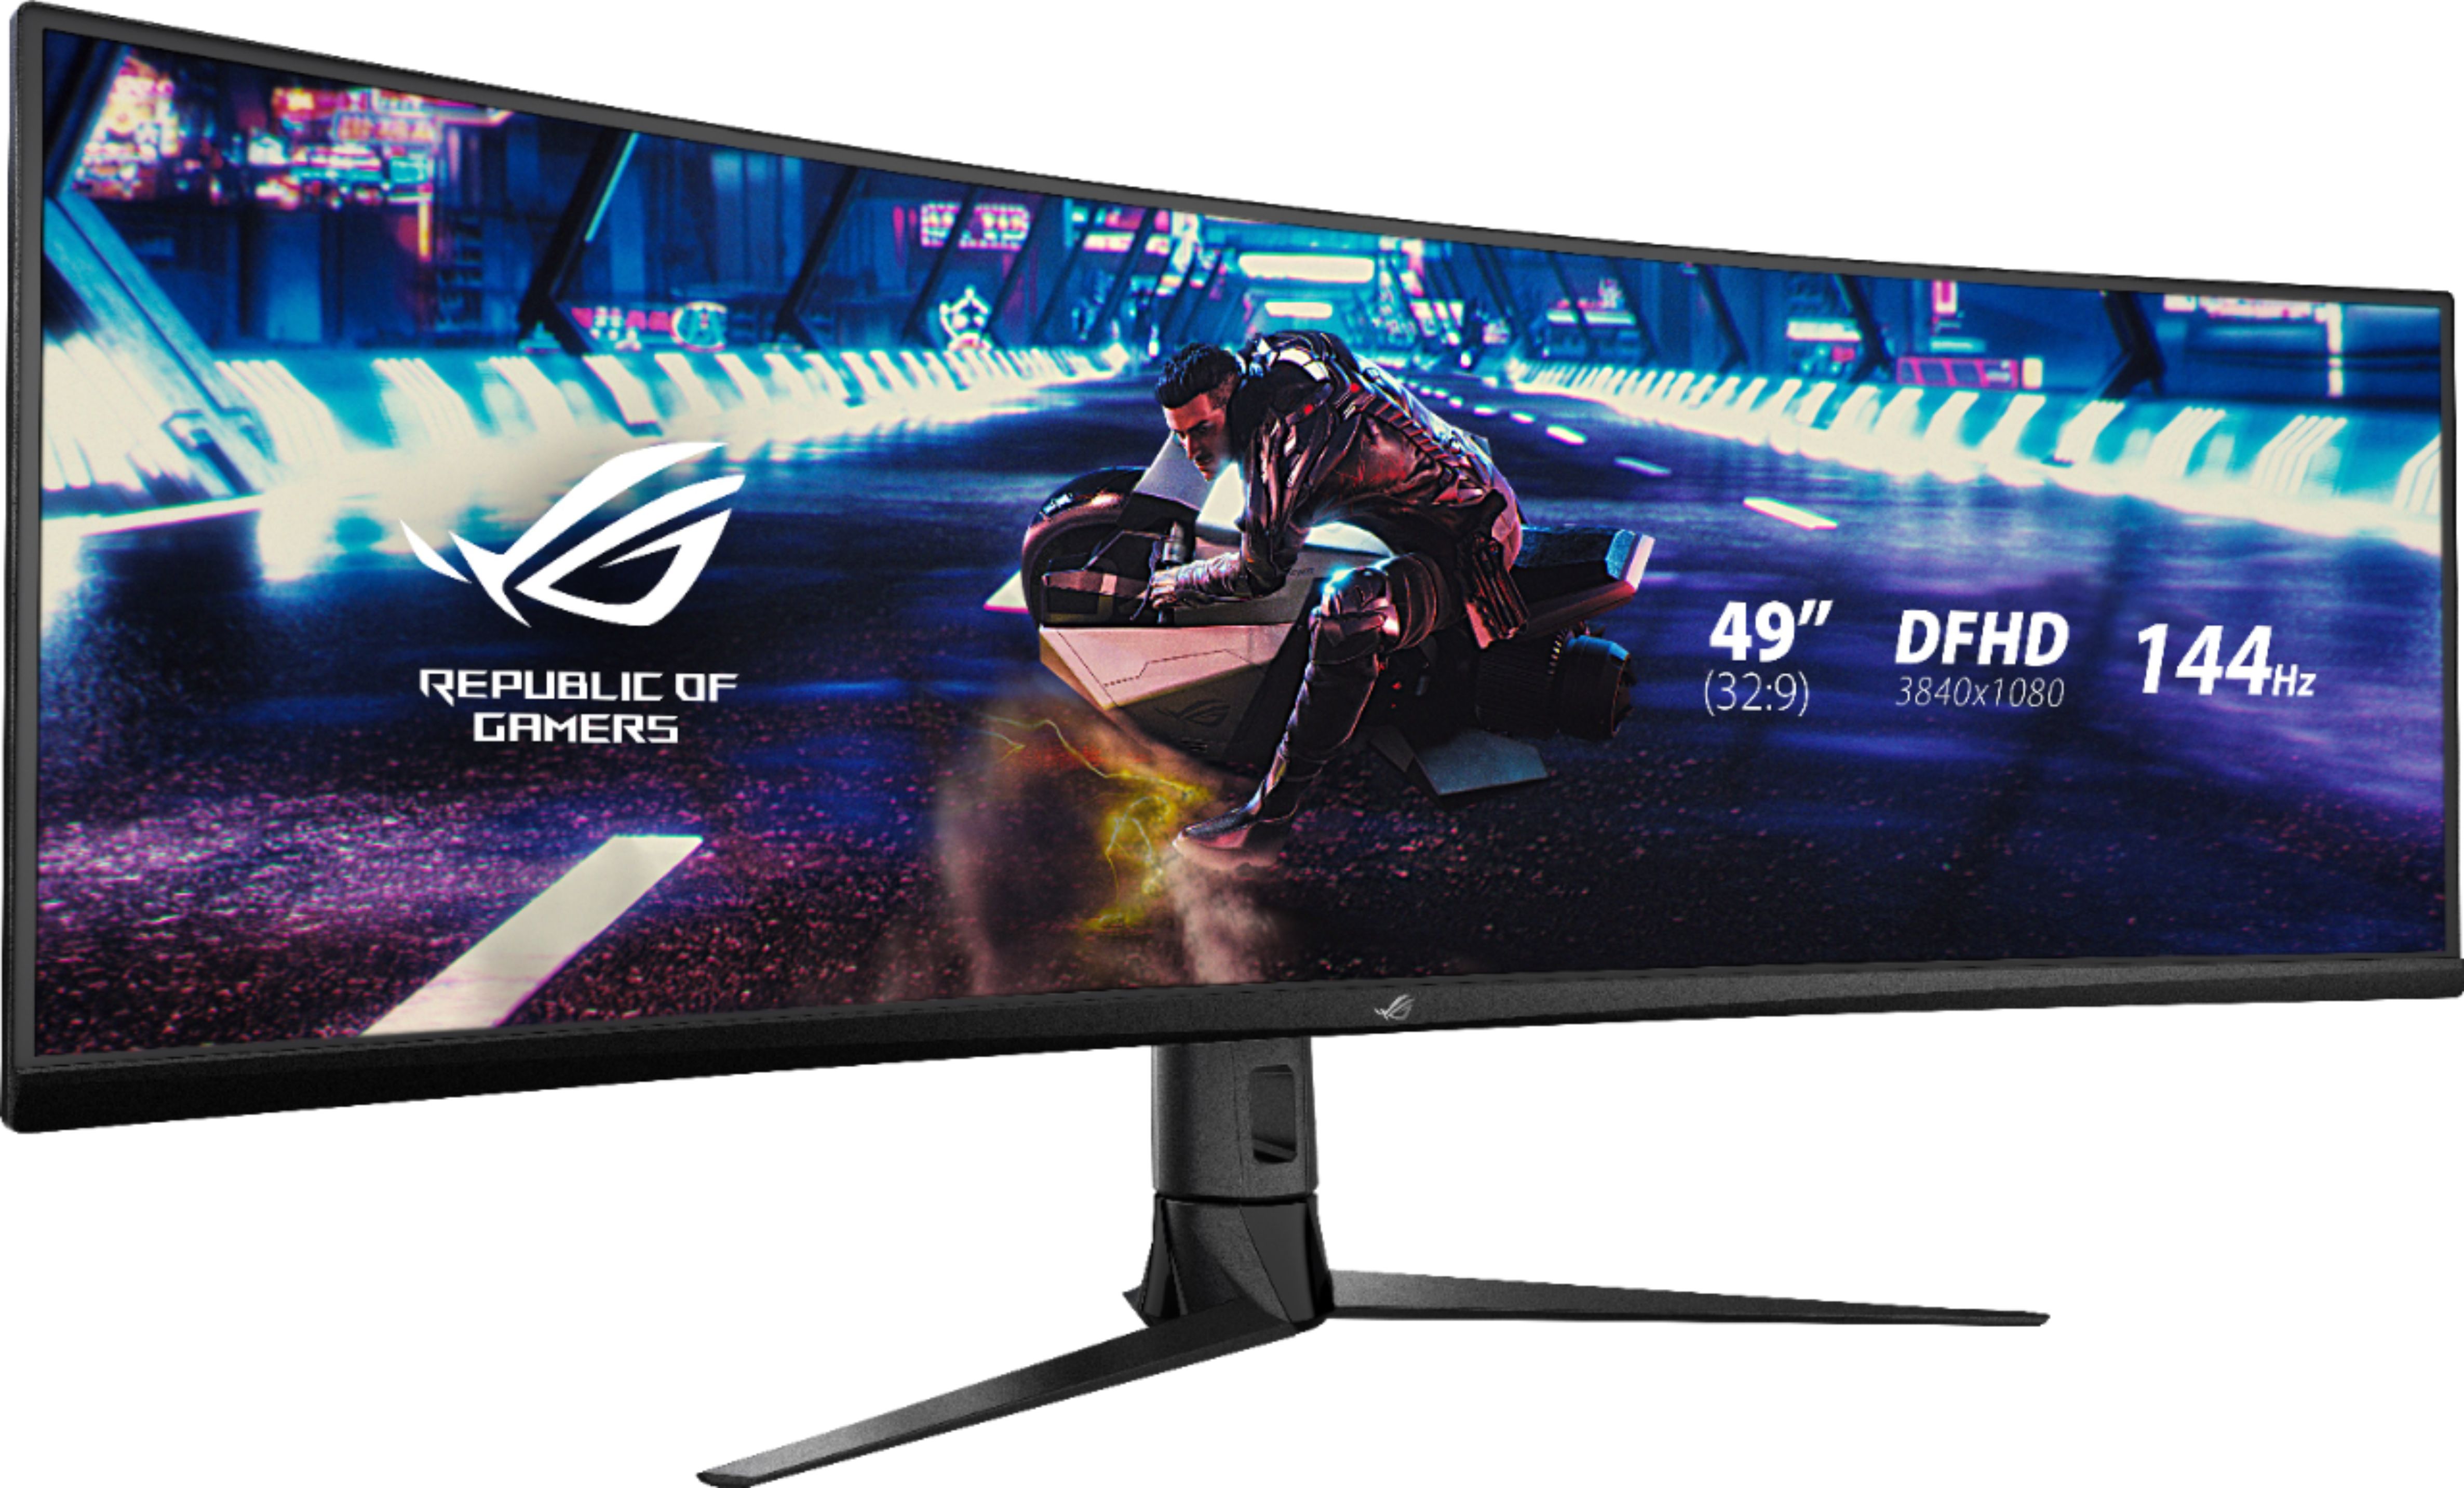 Angle View: ASUS - ROG Strix 49” Curved FHD 144Hz FreeSync Gaming Monitor with HDR (DisplayPort,HDMI,USB) - Black